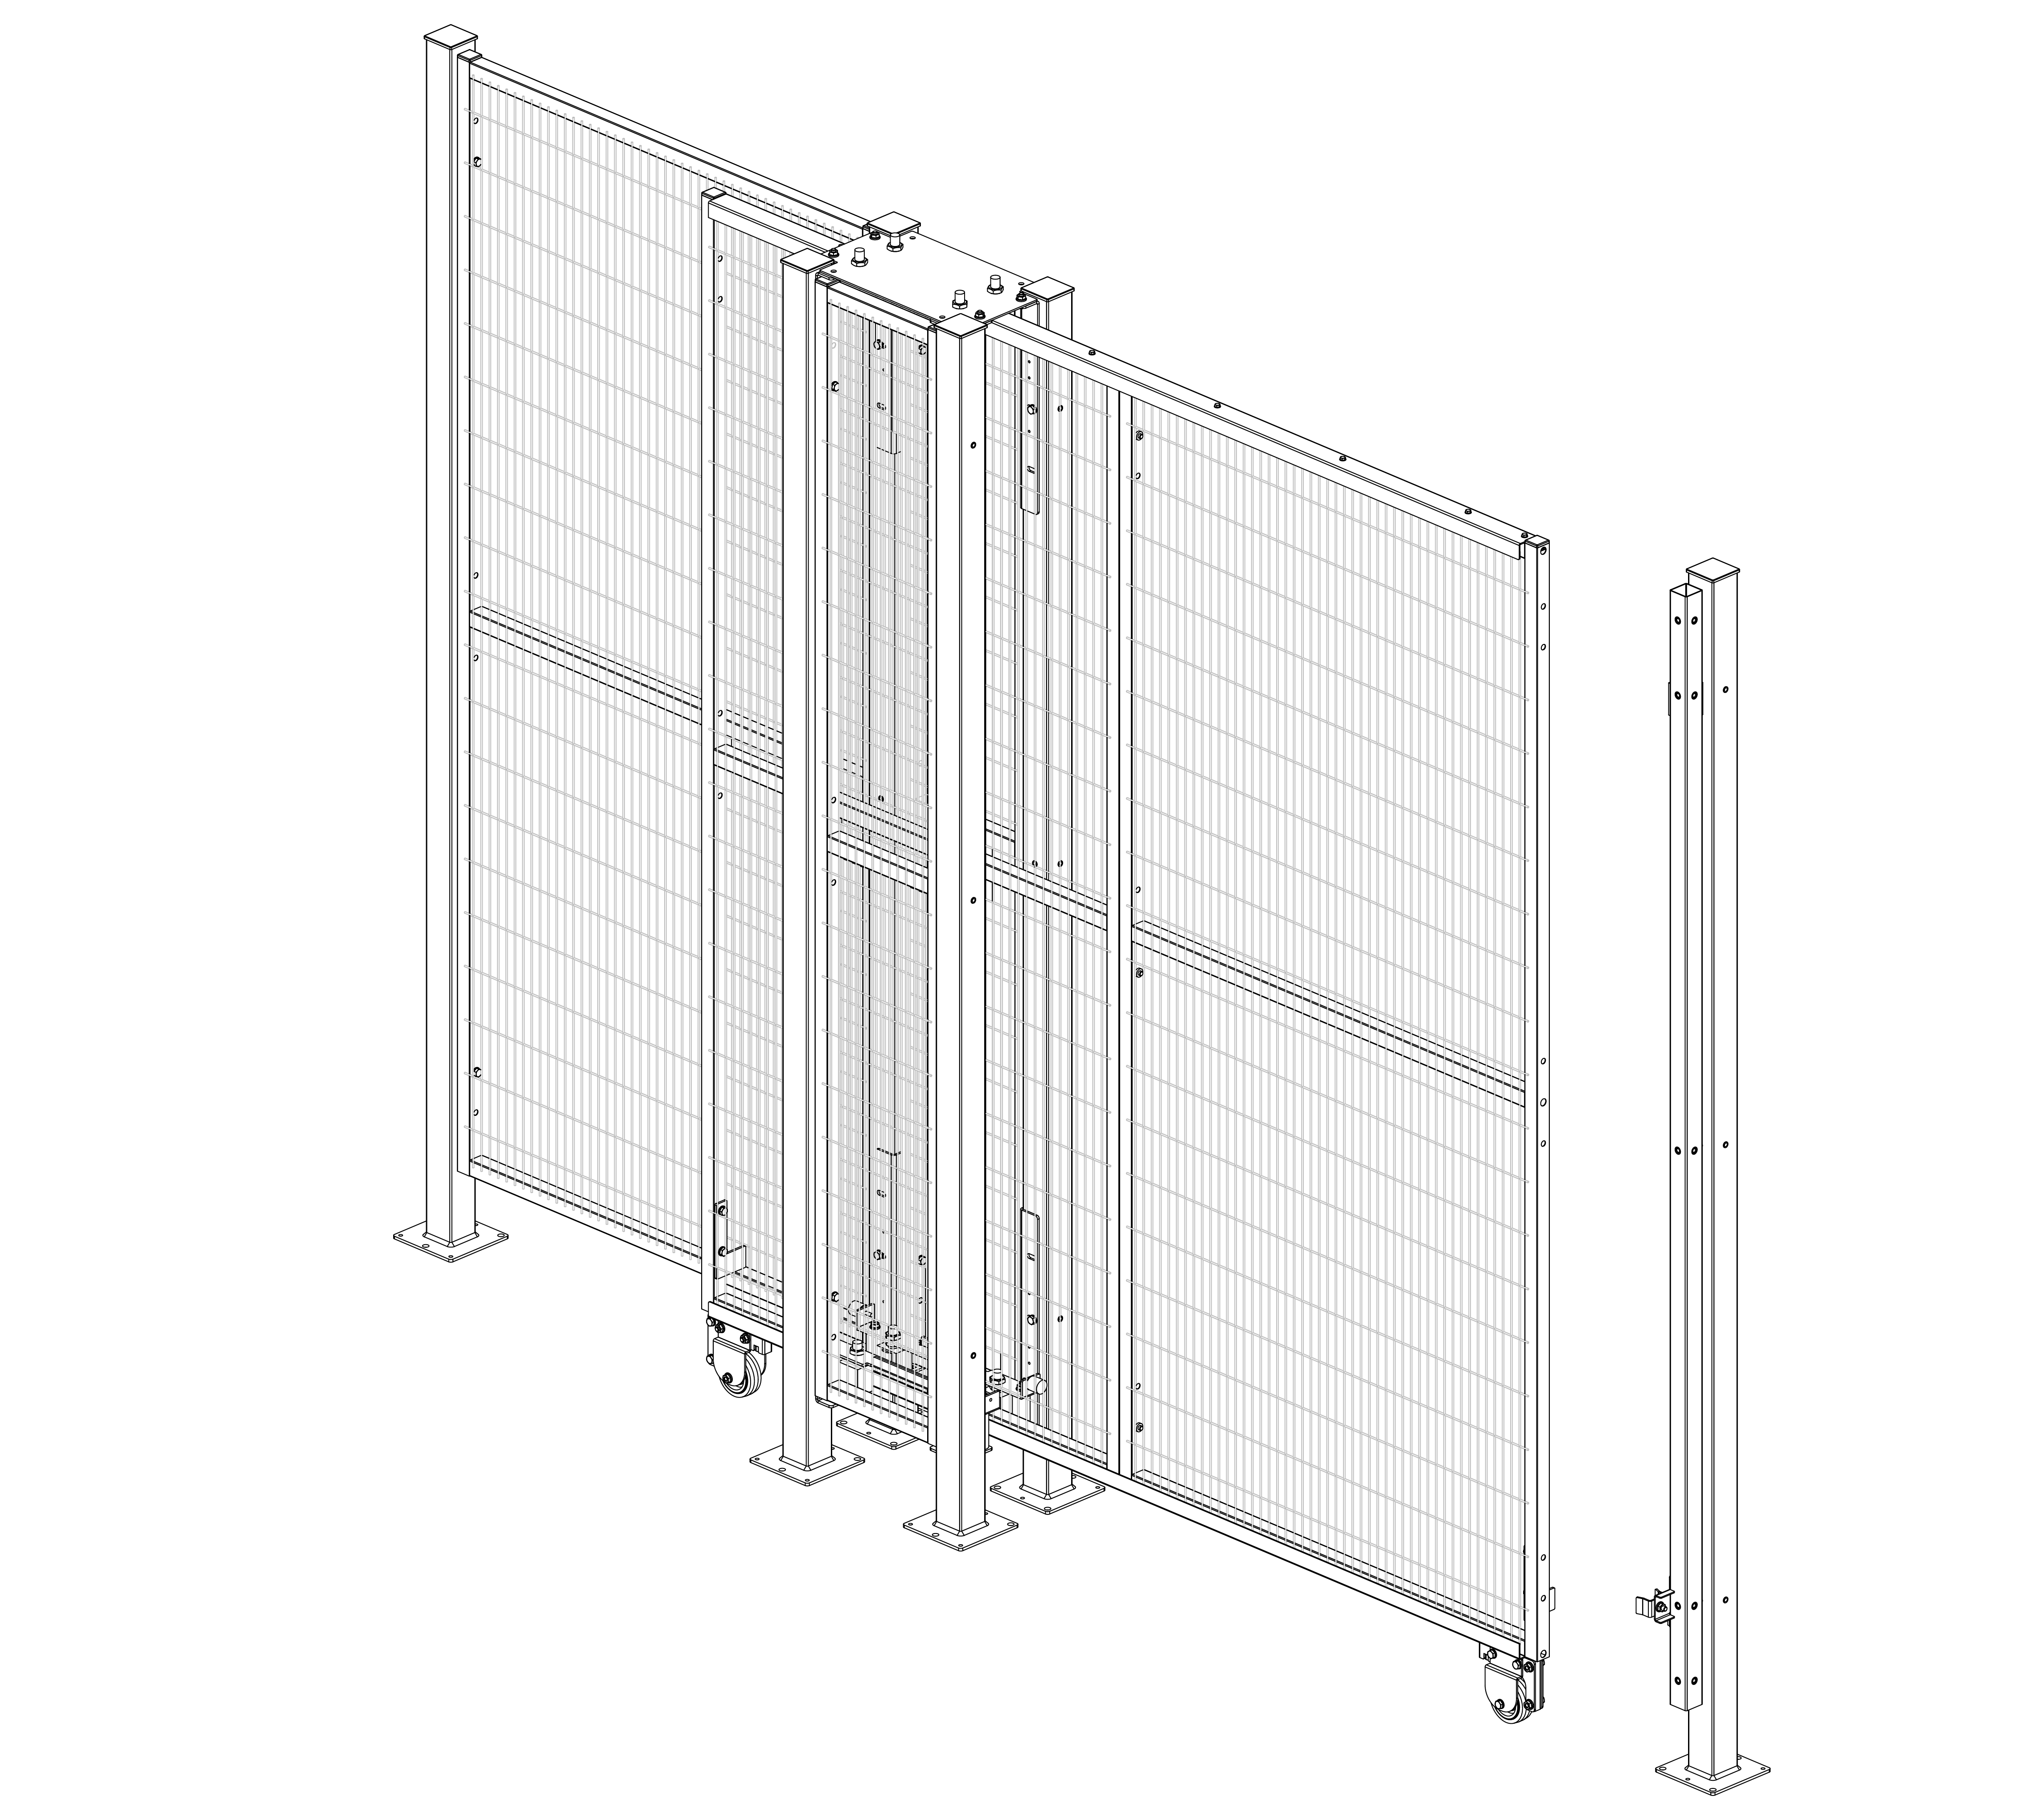 Technical Drawing of Standard Open Passage 3.0 Sliding Door for Perimeter Safety Guards